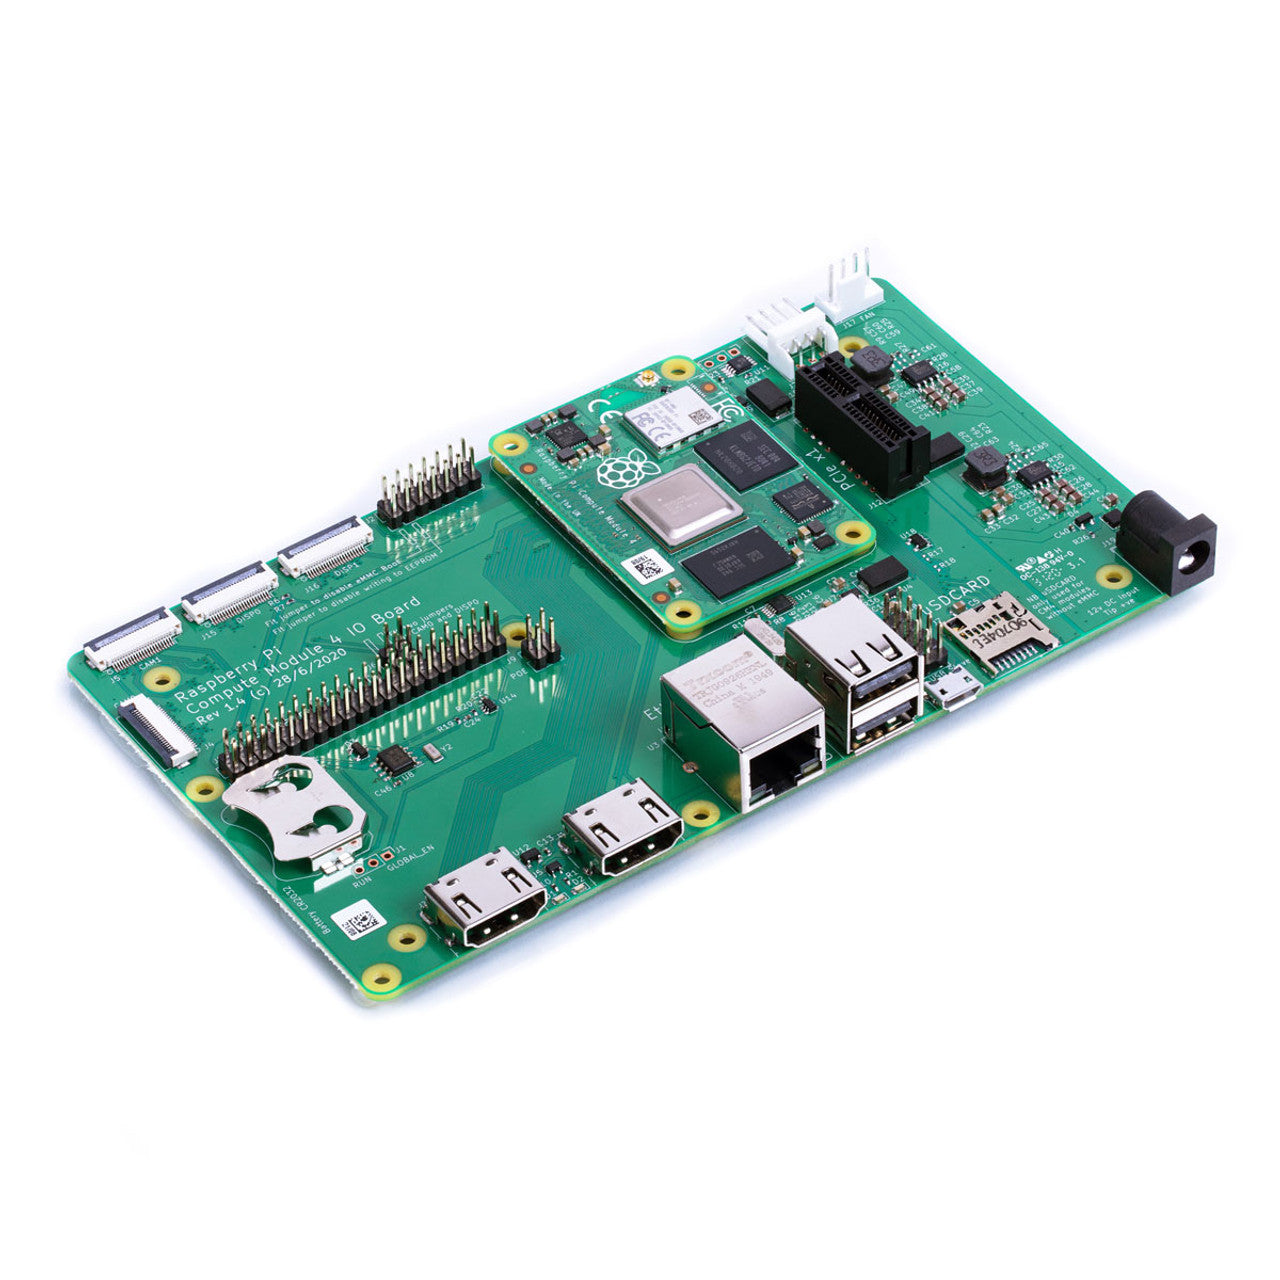 Raspberry Pi Compute Module 4 IO Board a Development Platform and Reference Base-Board Design for CM4 Without WiFi